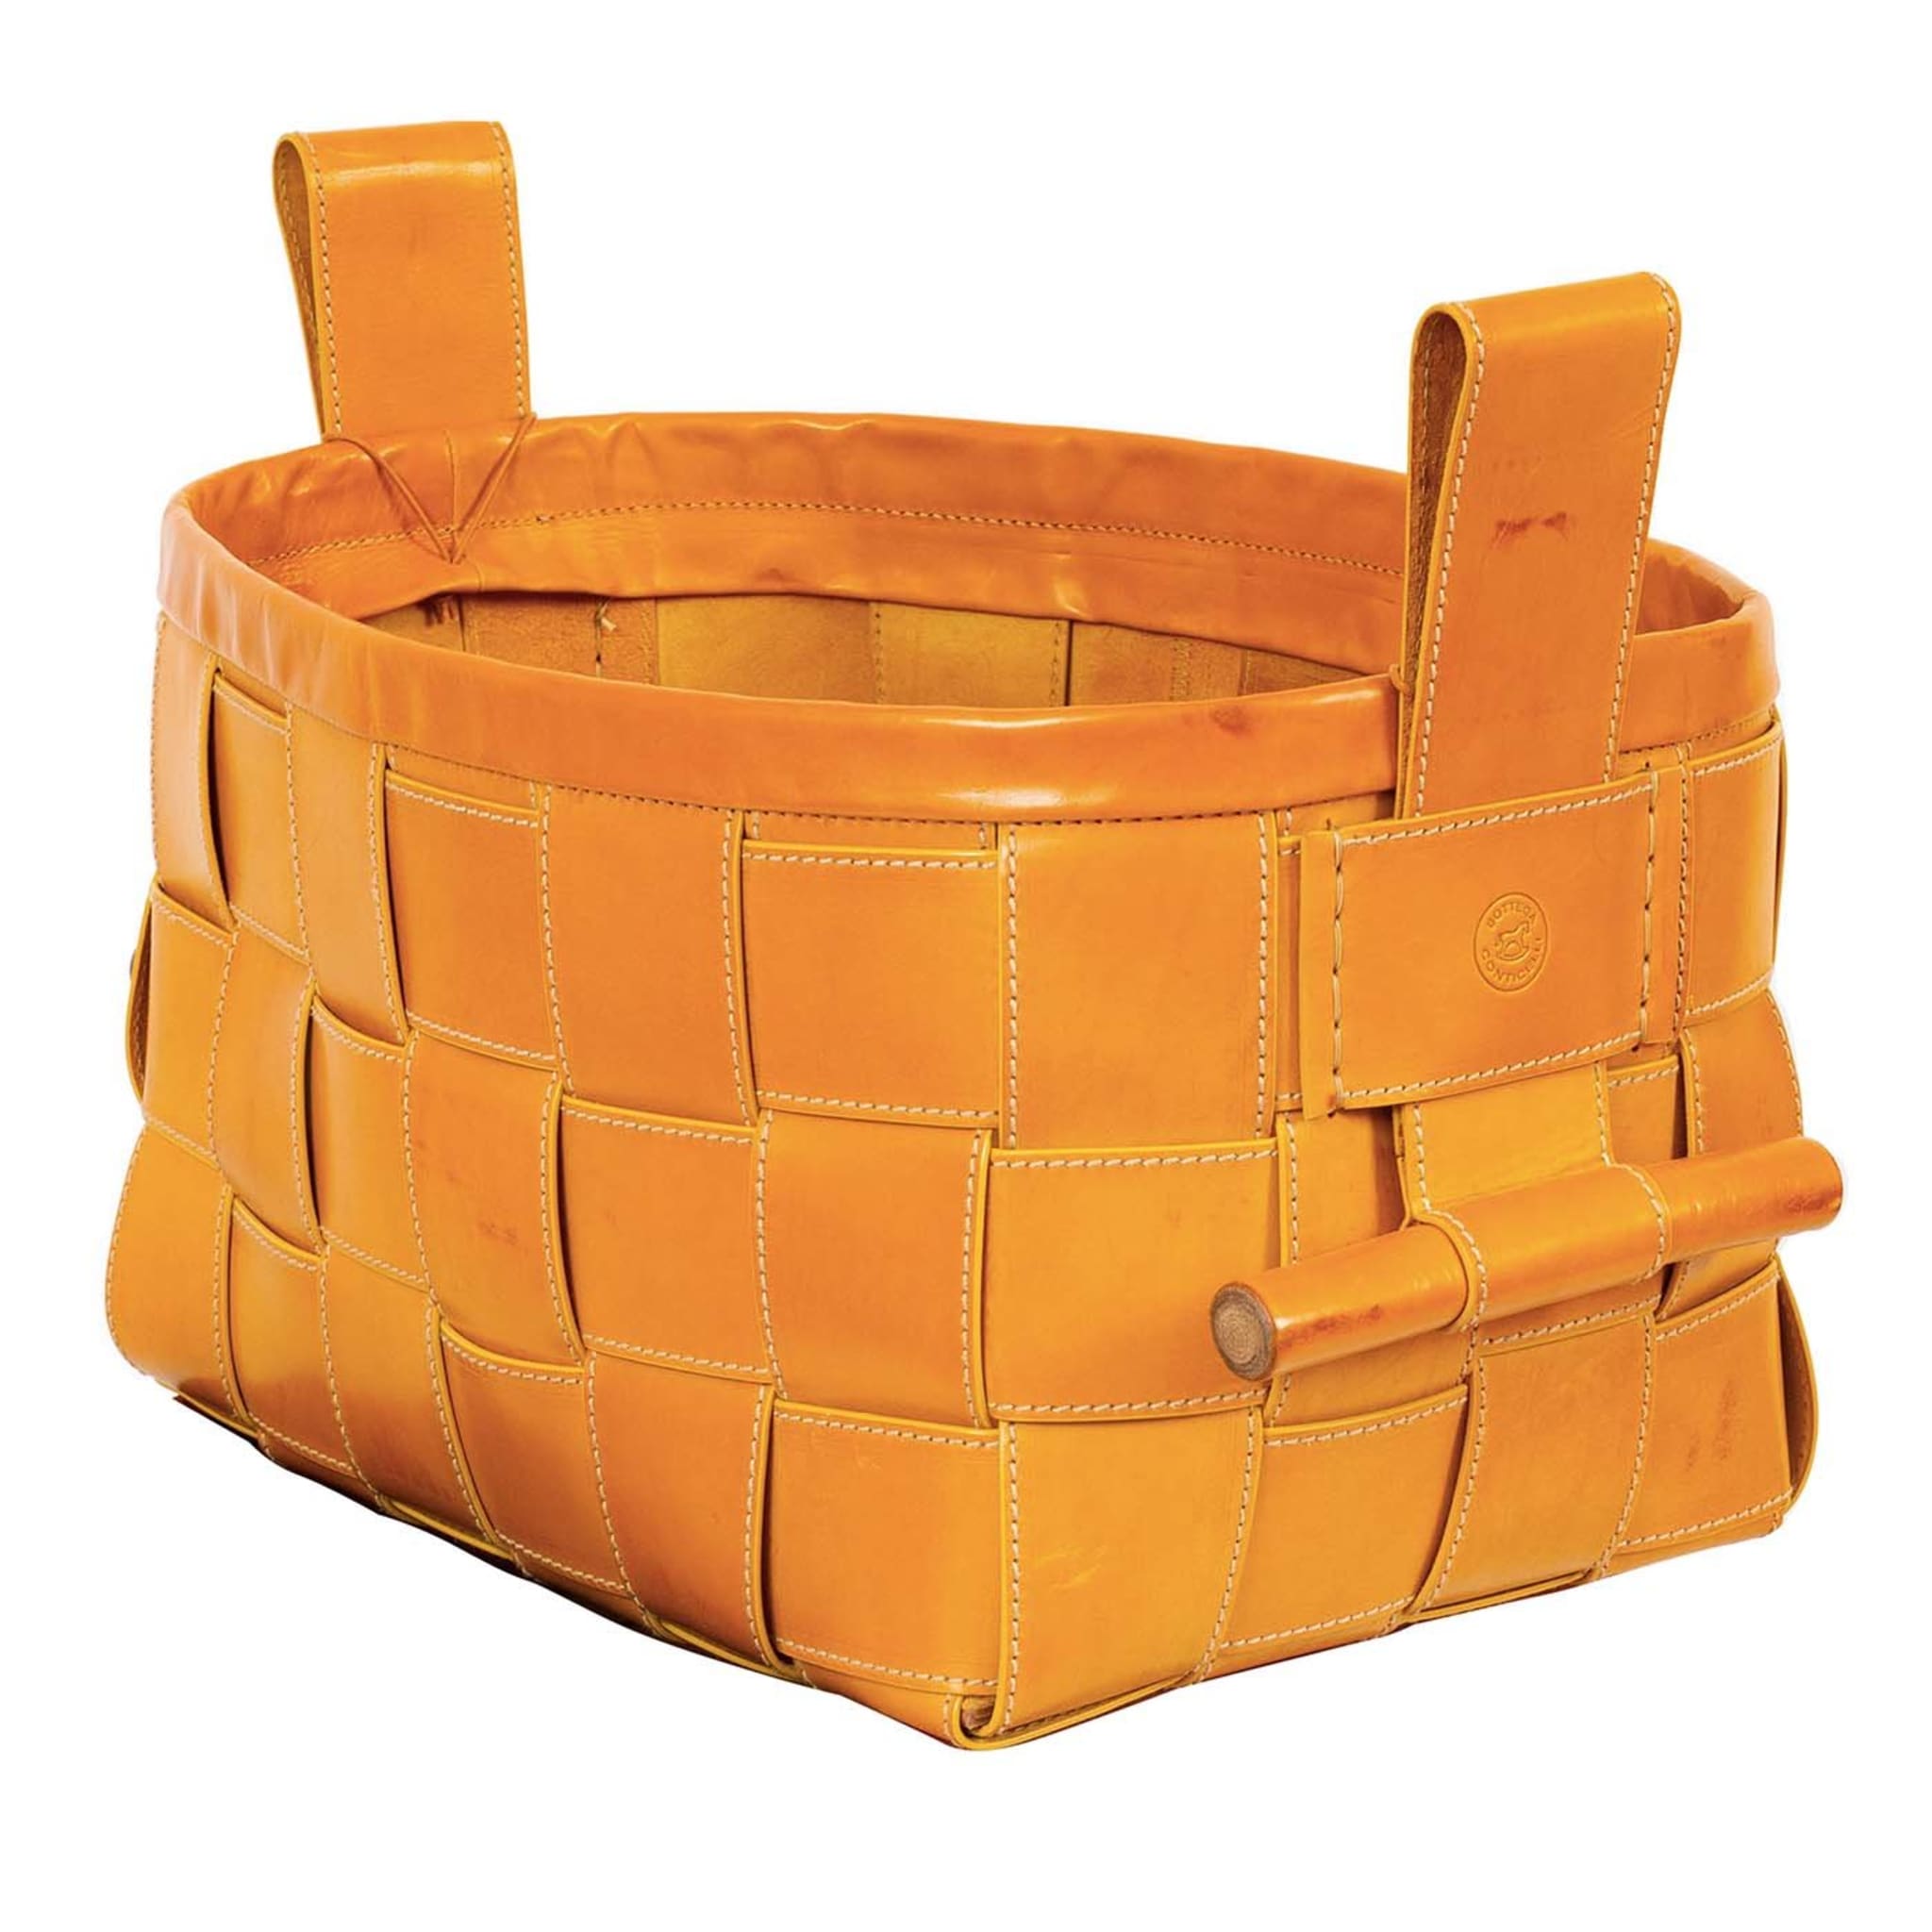 Woven Leather Basket Mustard Yellow - Main view